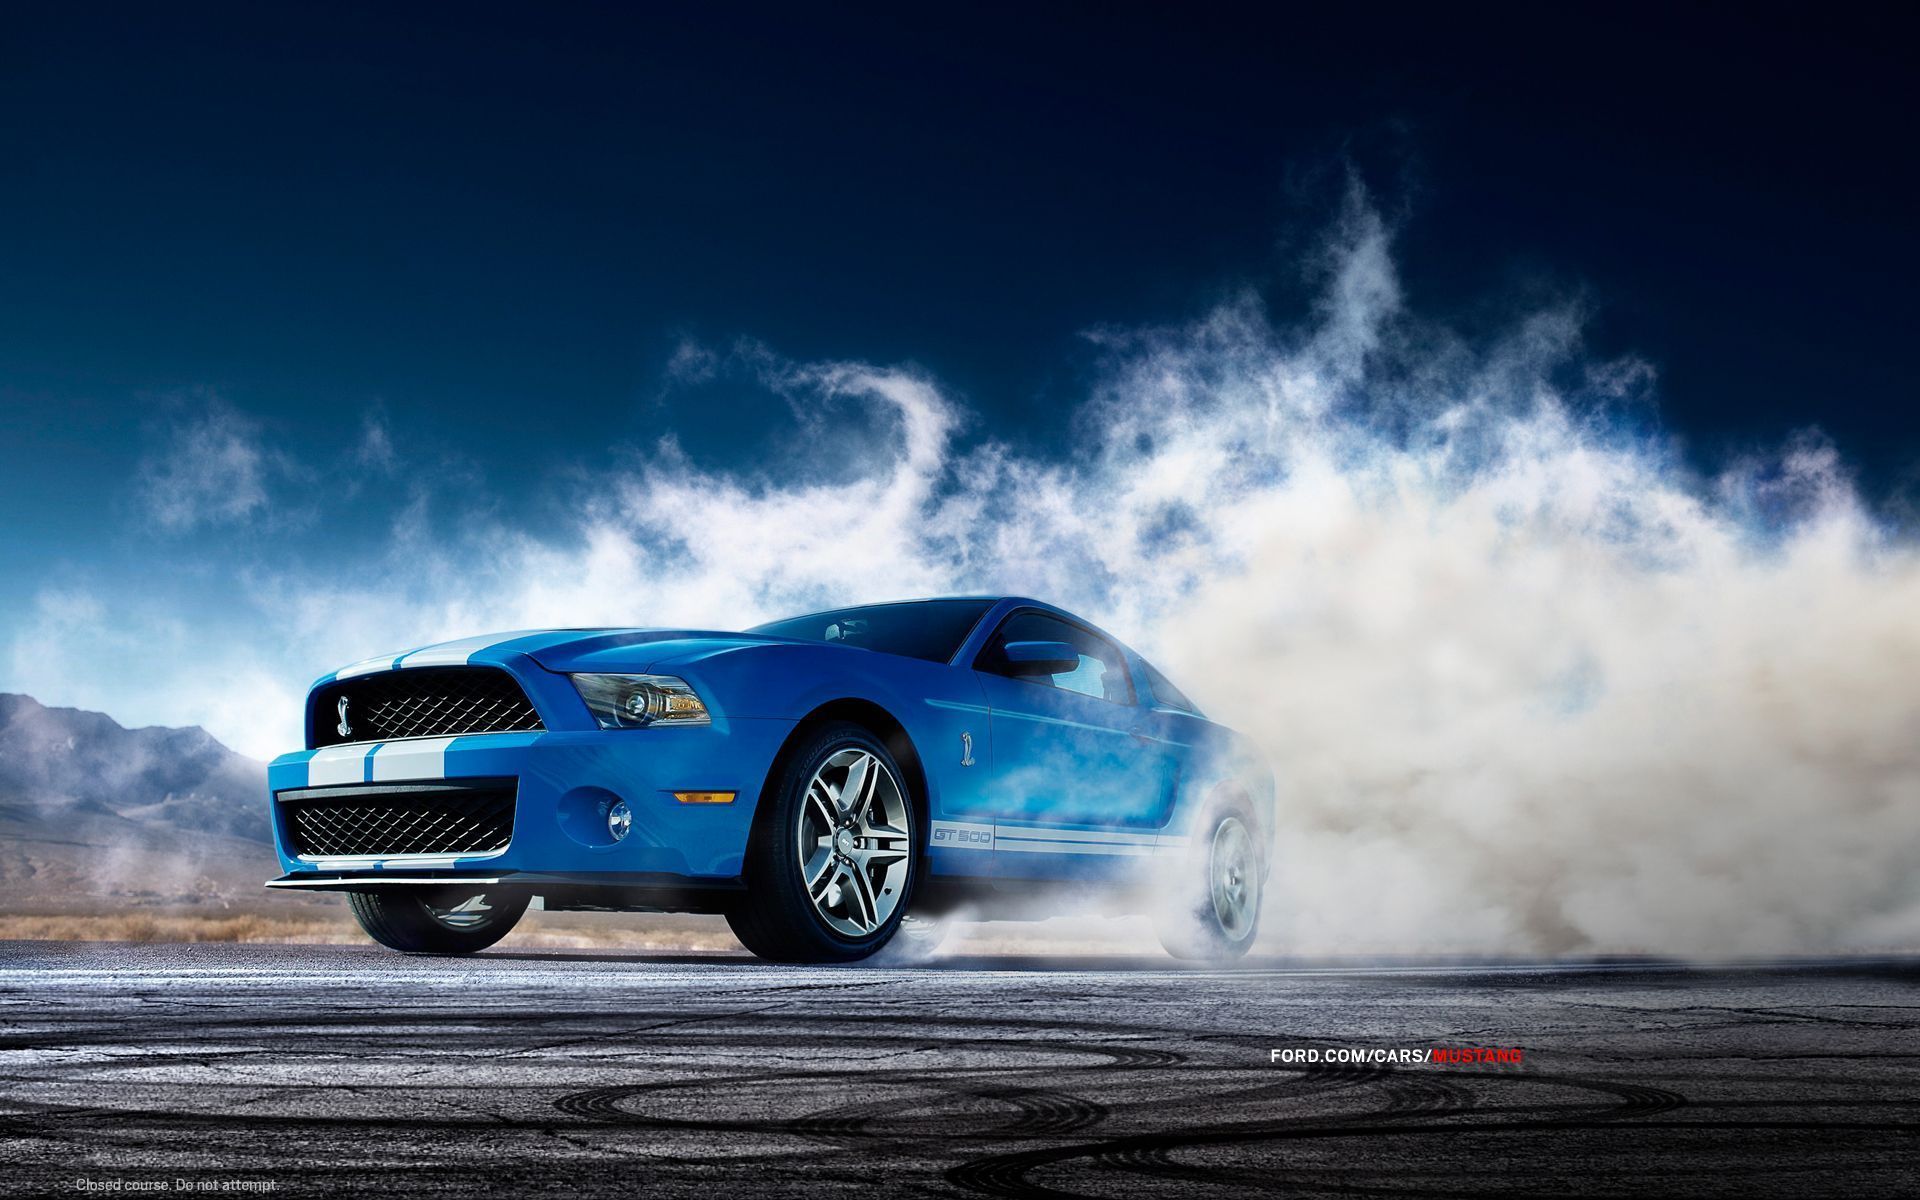 Awesome Ford Mustang Shelby Wallpaper | Full HD Pictures